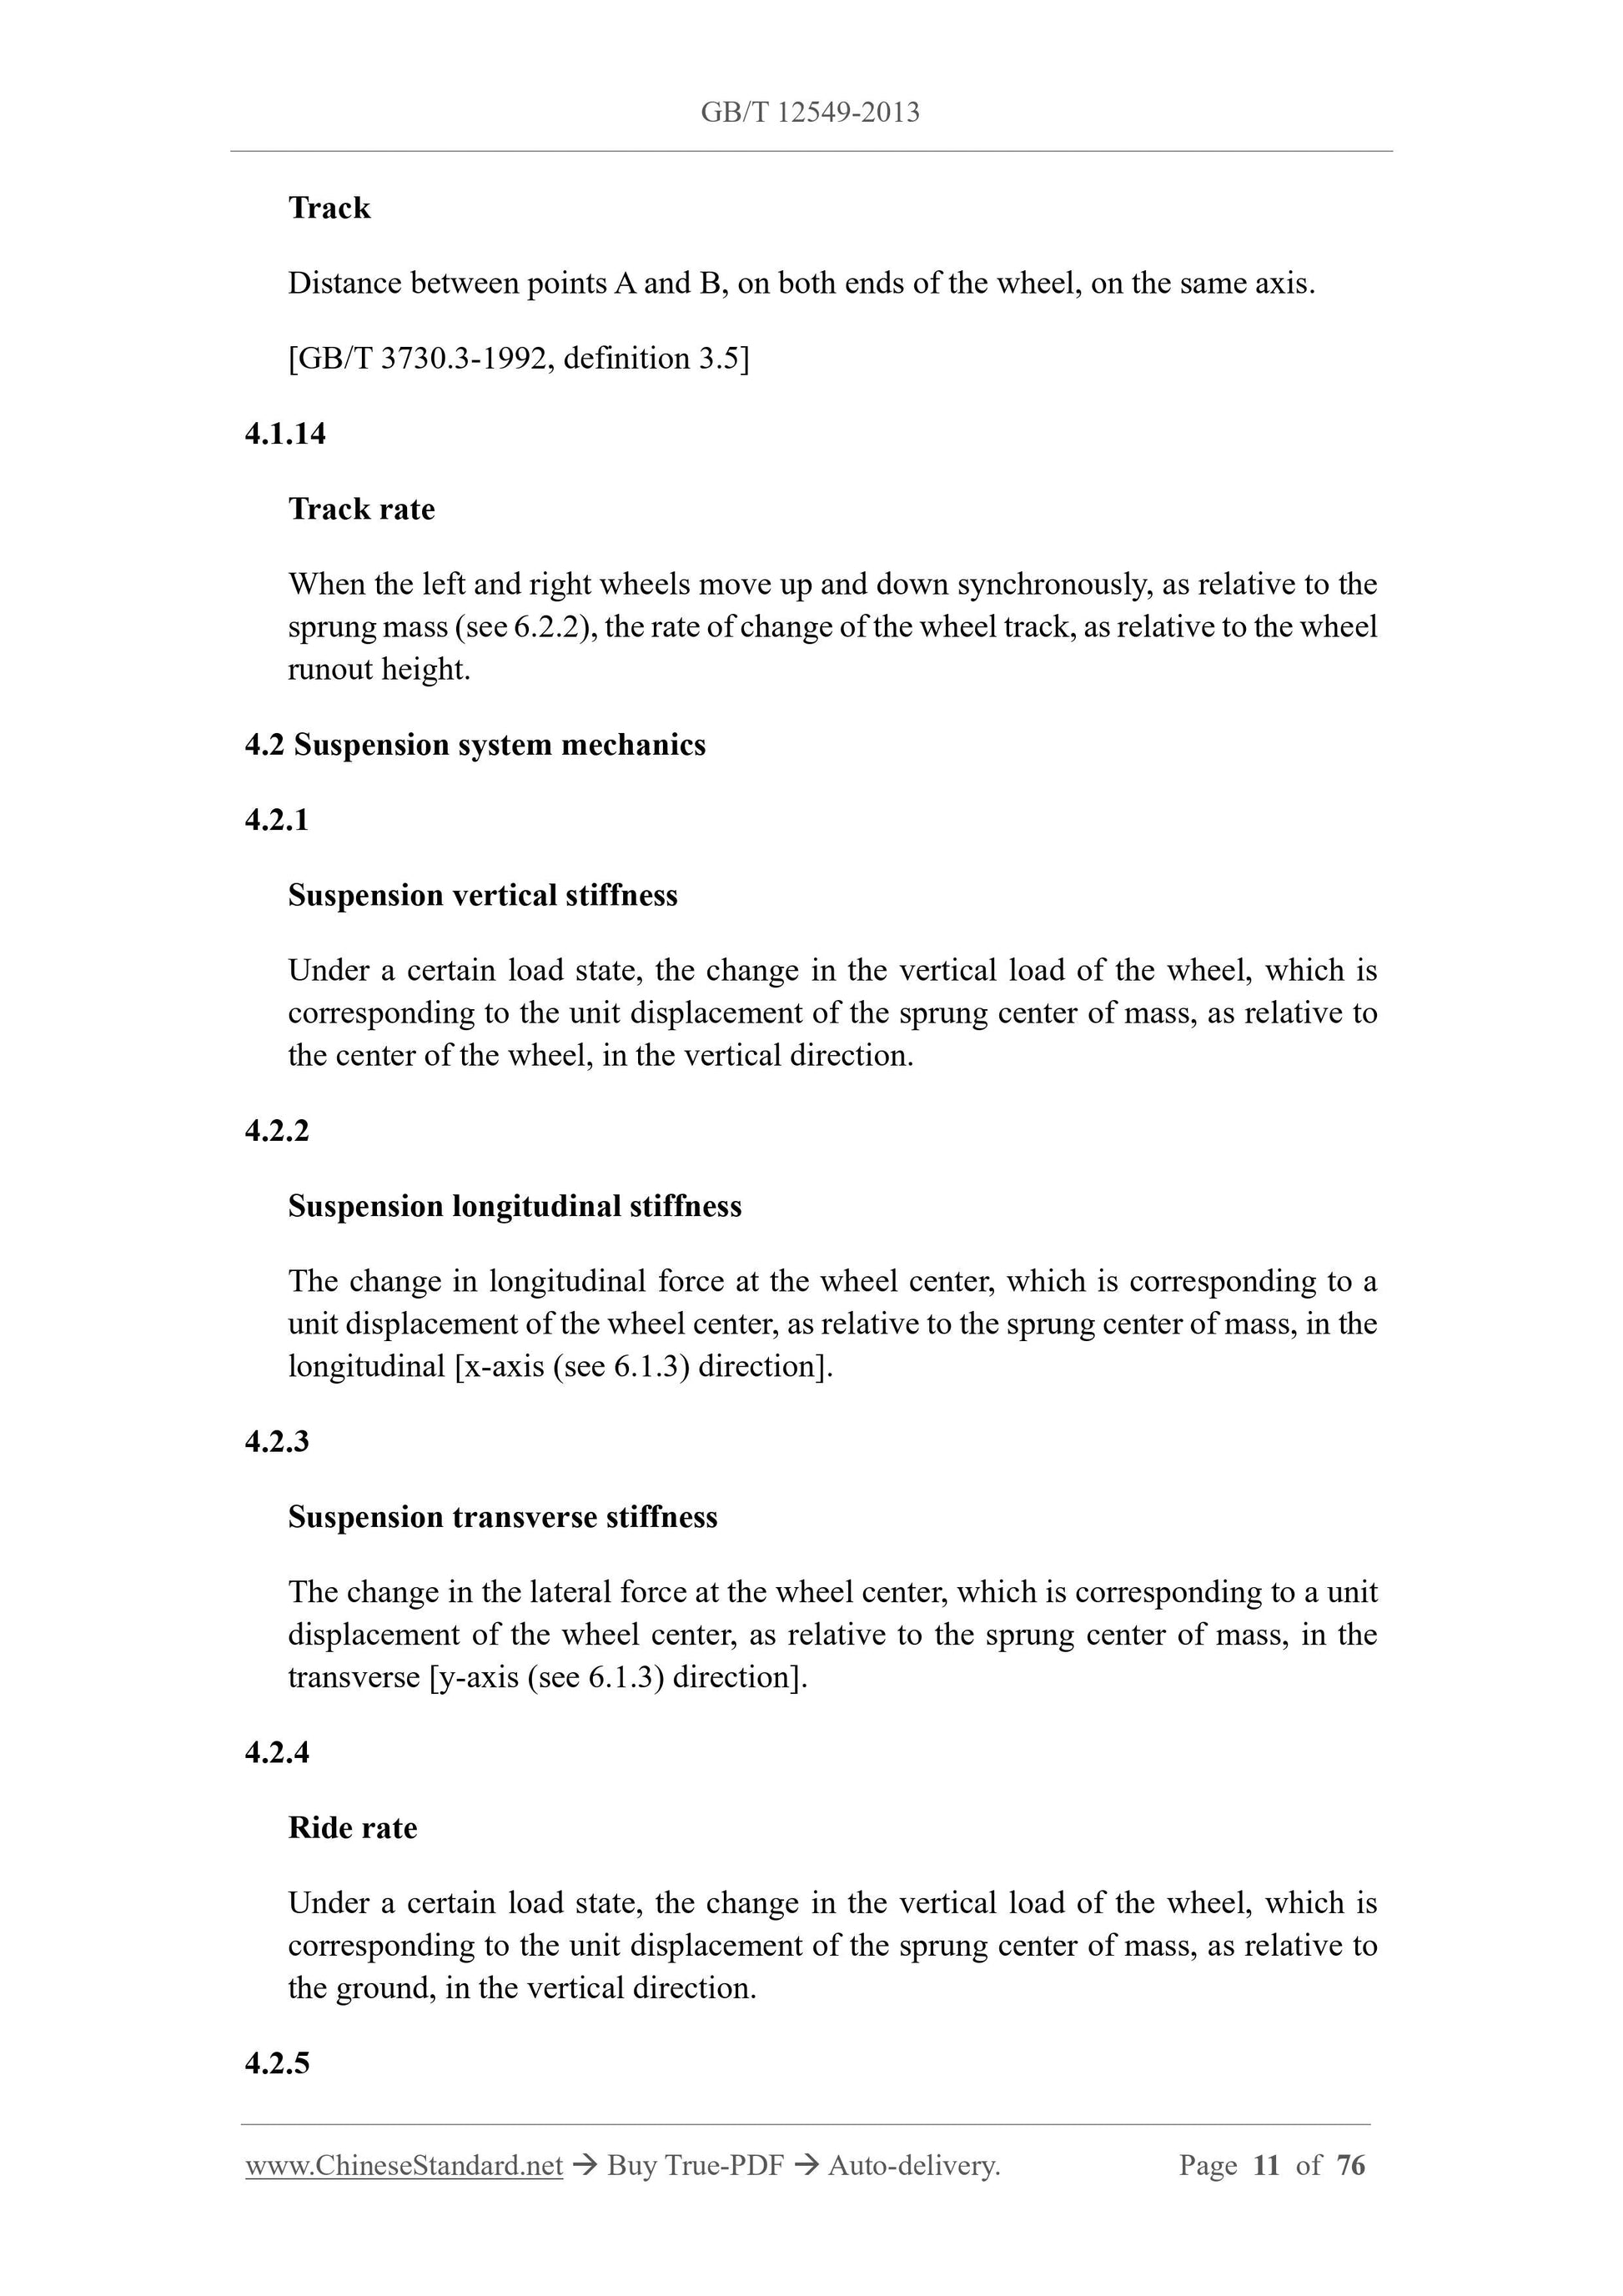 GB/T 12549-2013 Page 8